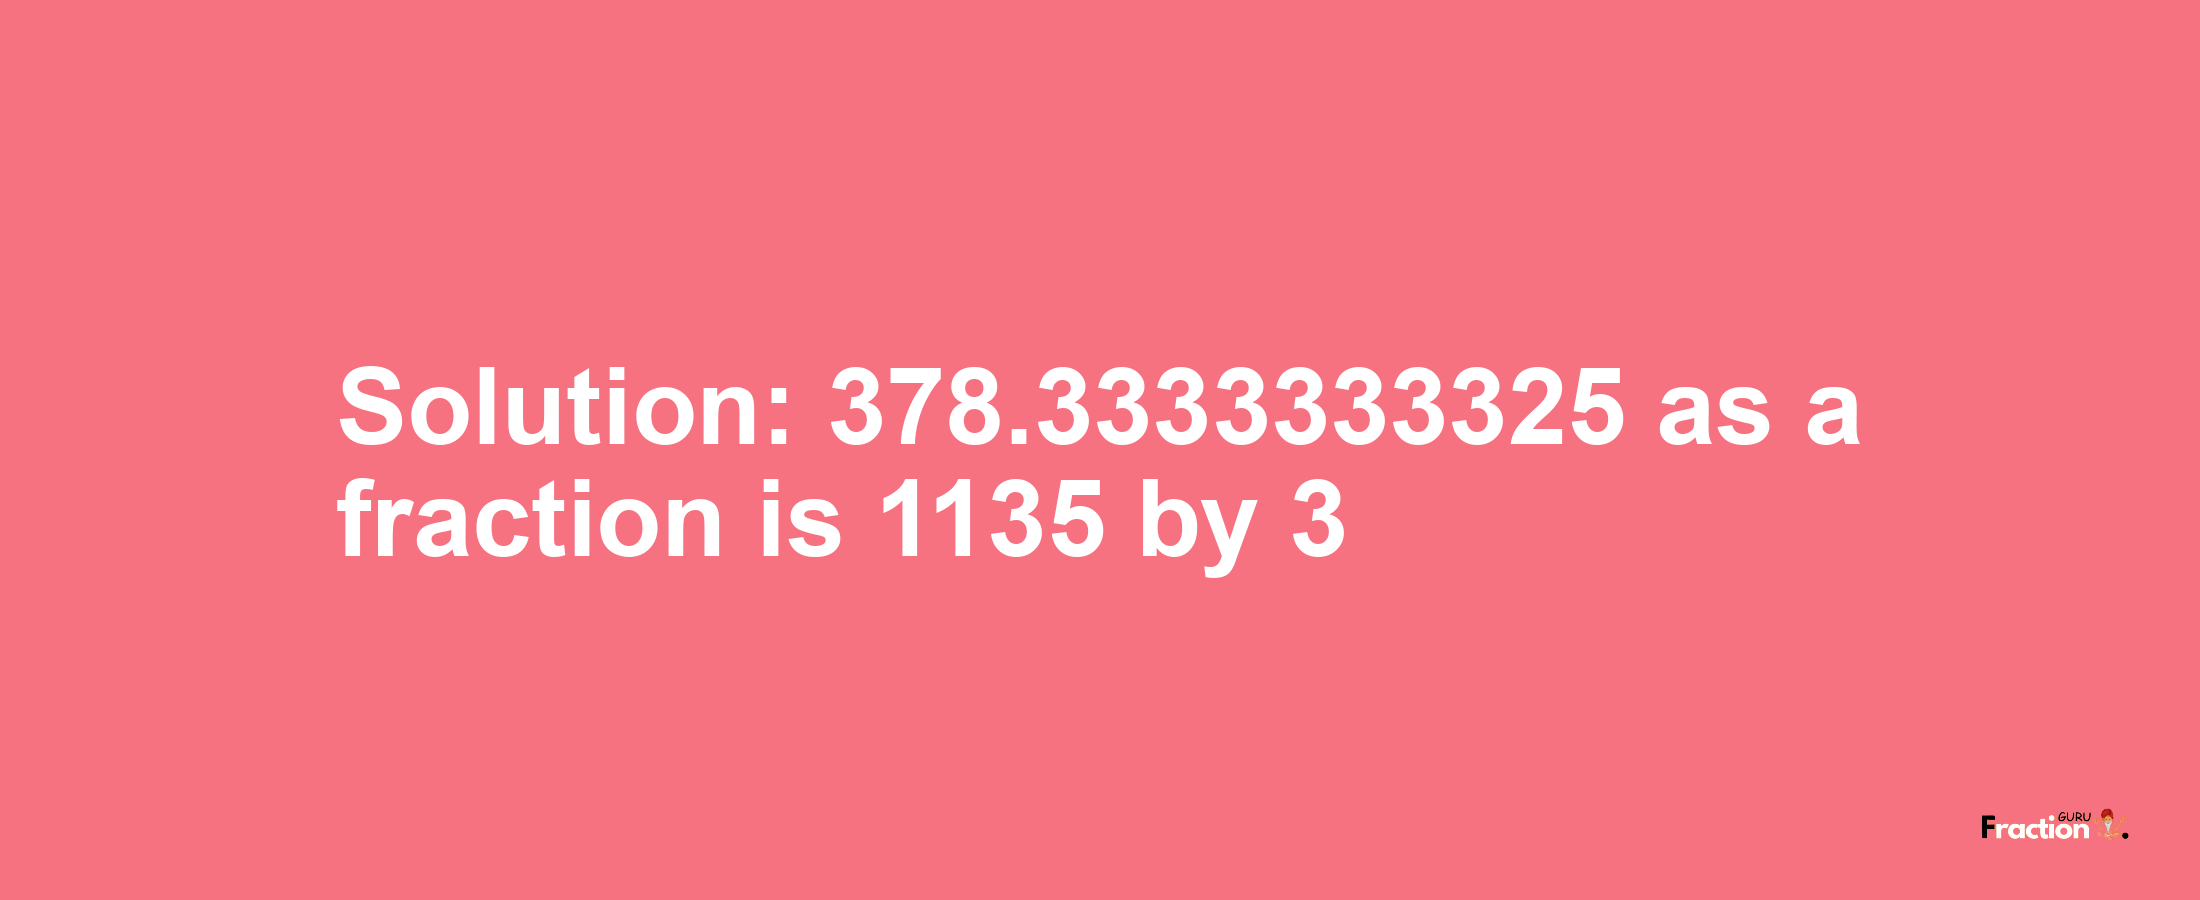 Solution:378.3333333325 as a fraction is 1135/3